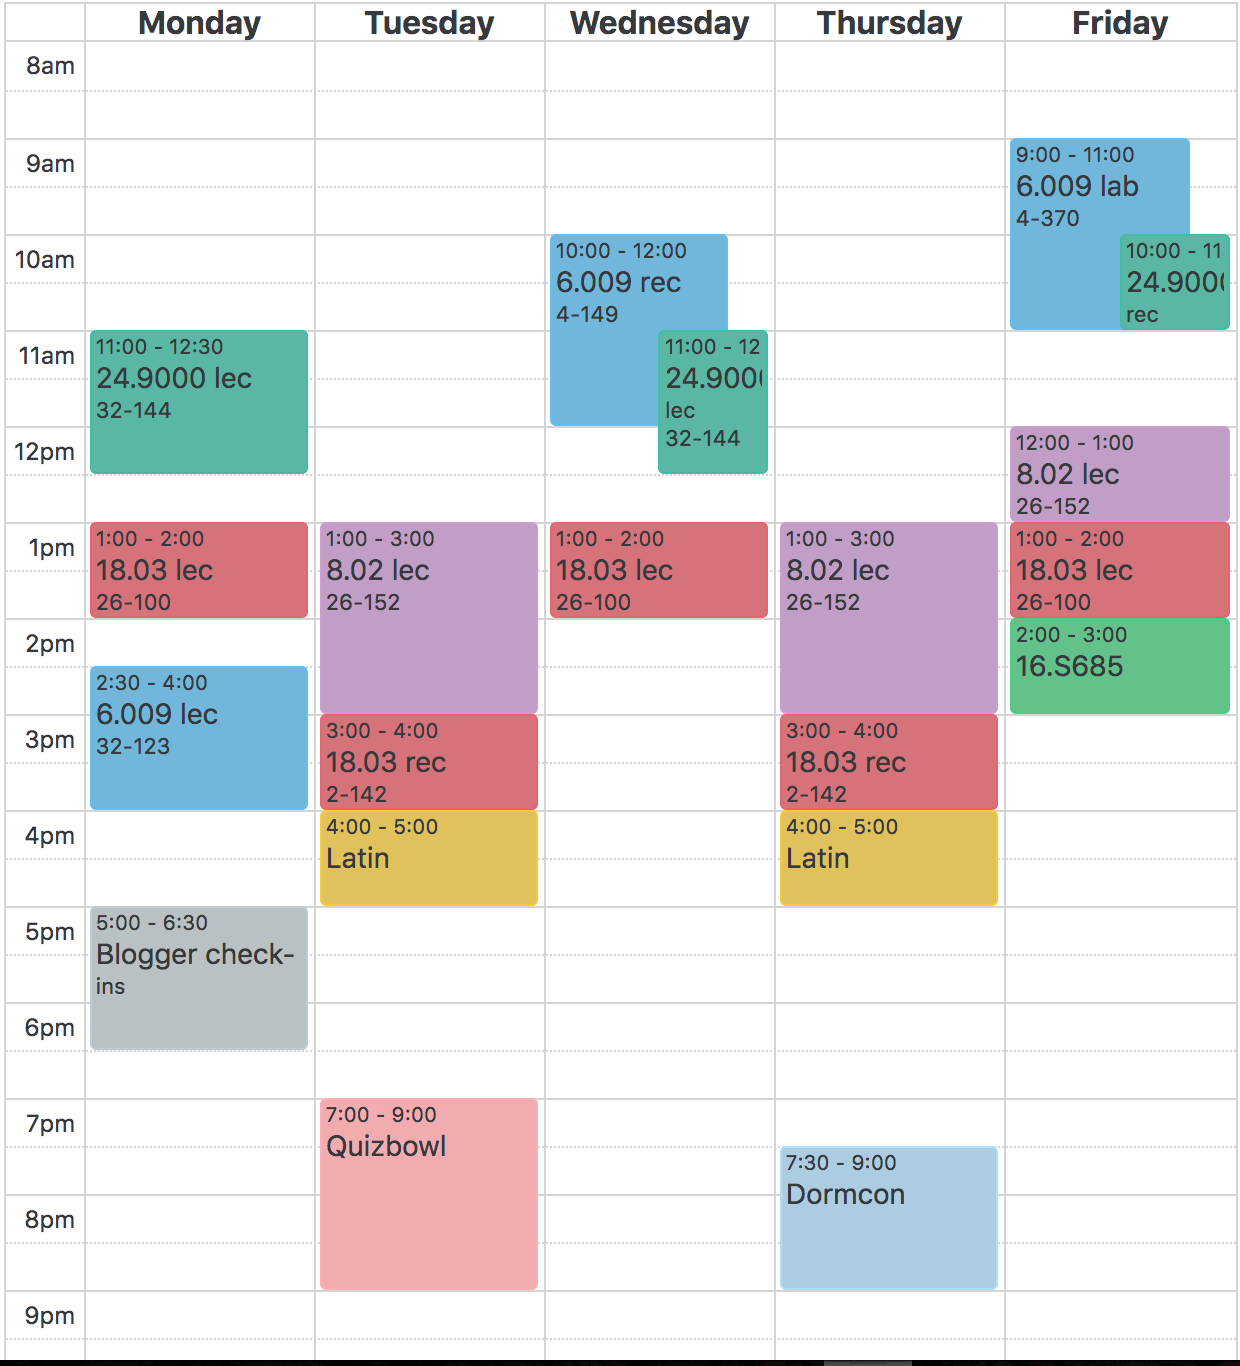 A screenshot of my weekly schedule for this semester, plotted using an MIT-specific (and ubiquitous) online course planner called Firehose.